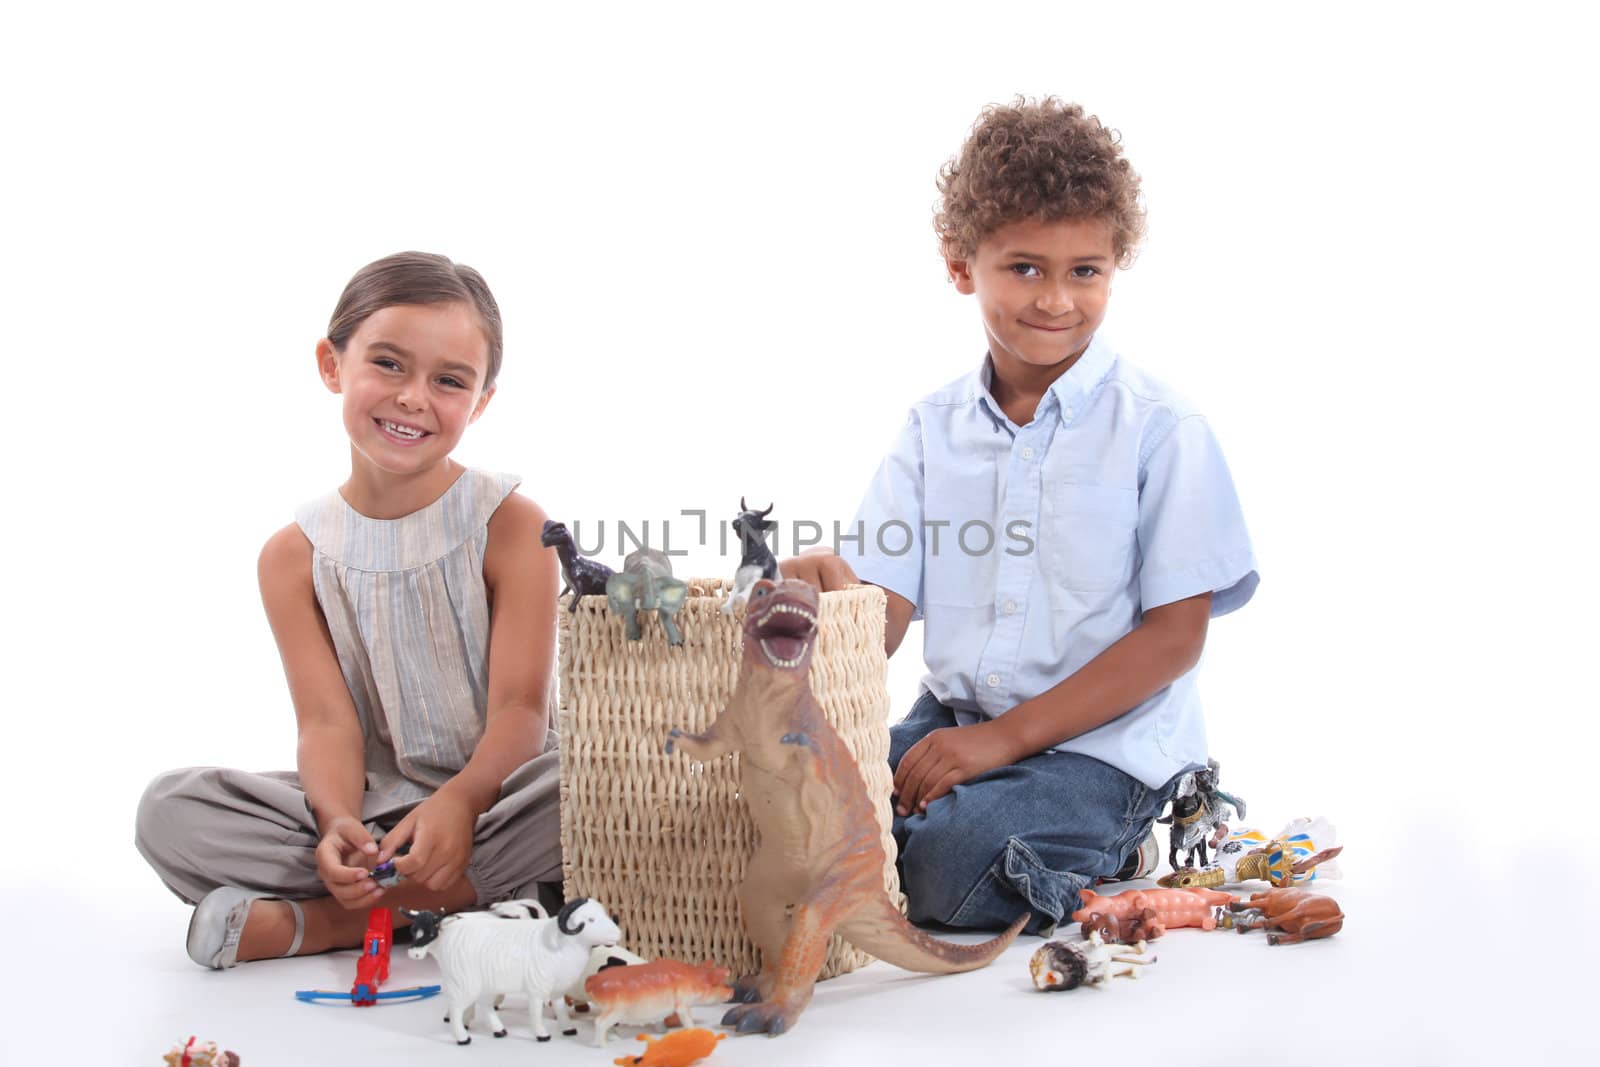 Children playing with plastic toy figurines